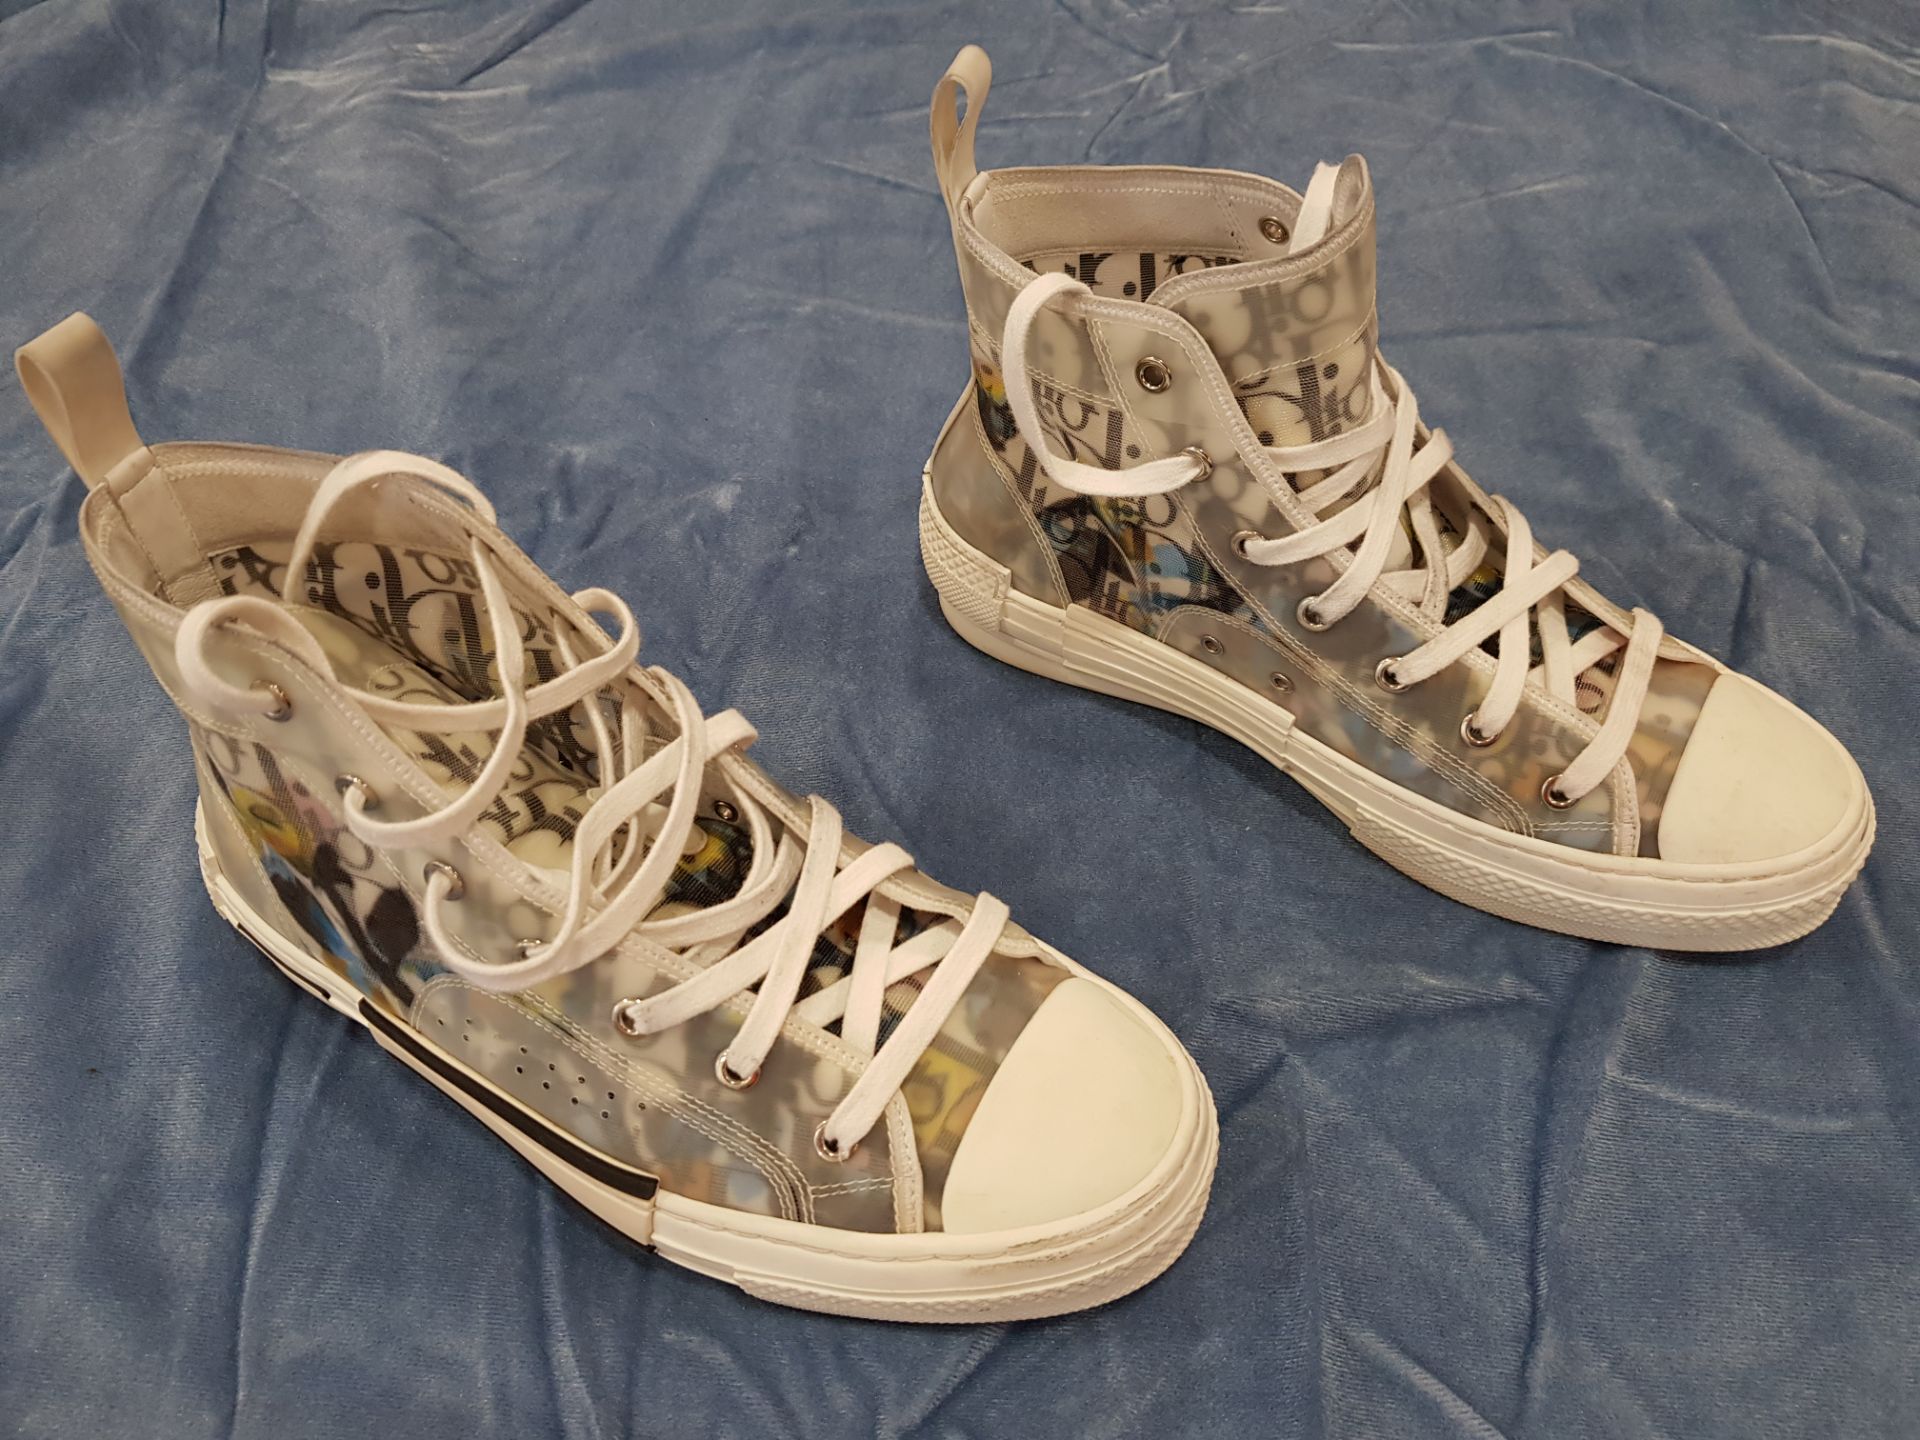 1 X PAIR CHRISTIAN DIOR HIGH TOP TRAINERS SIZE 40 - PLEASE NOTE ITEMS PRE OWNED NOT NEW